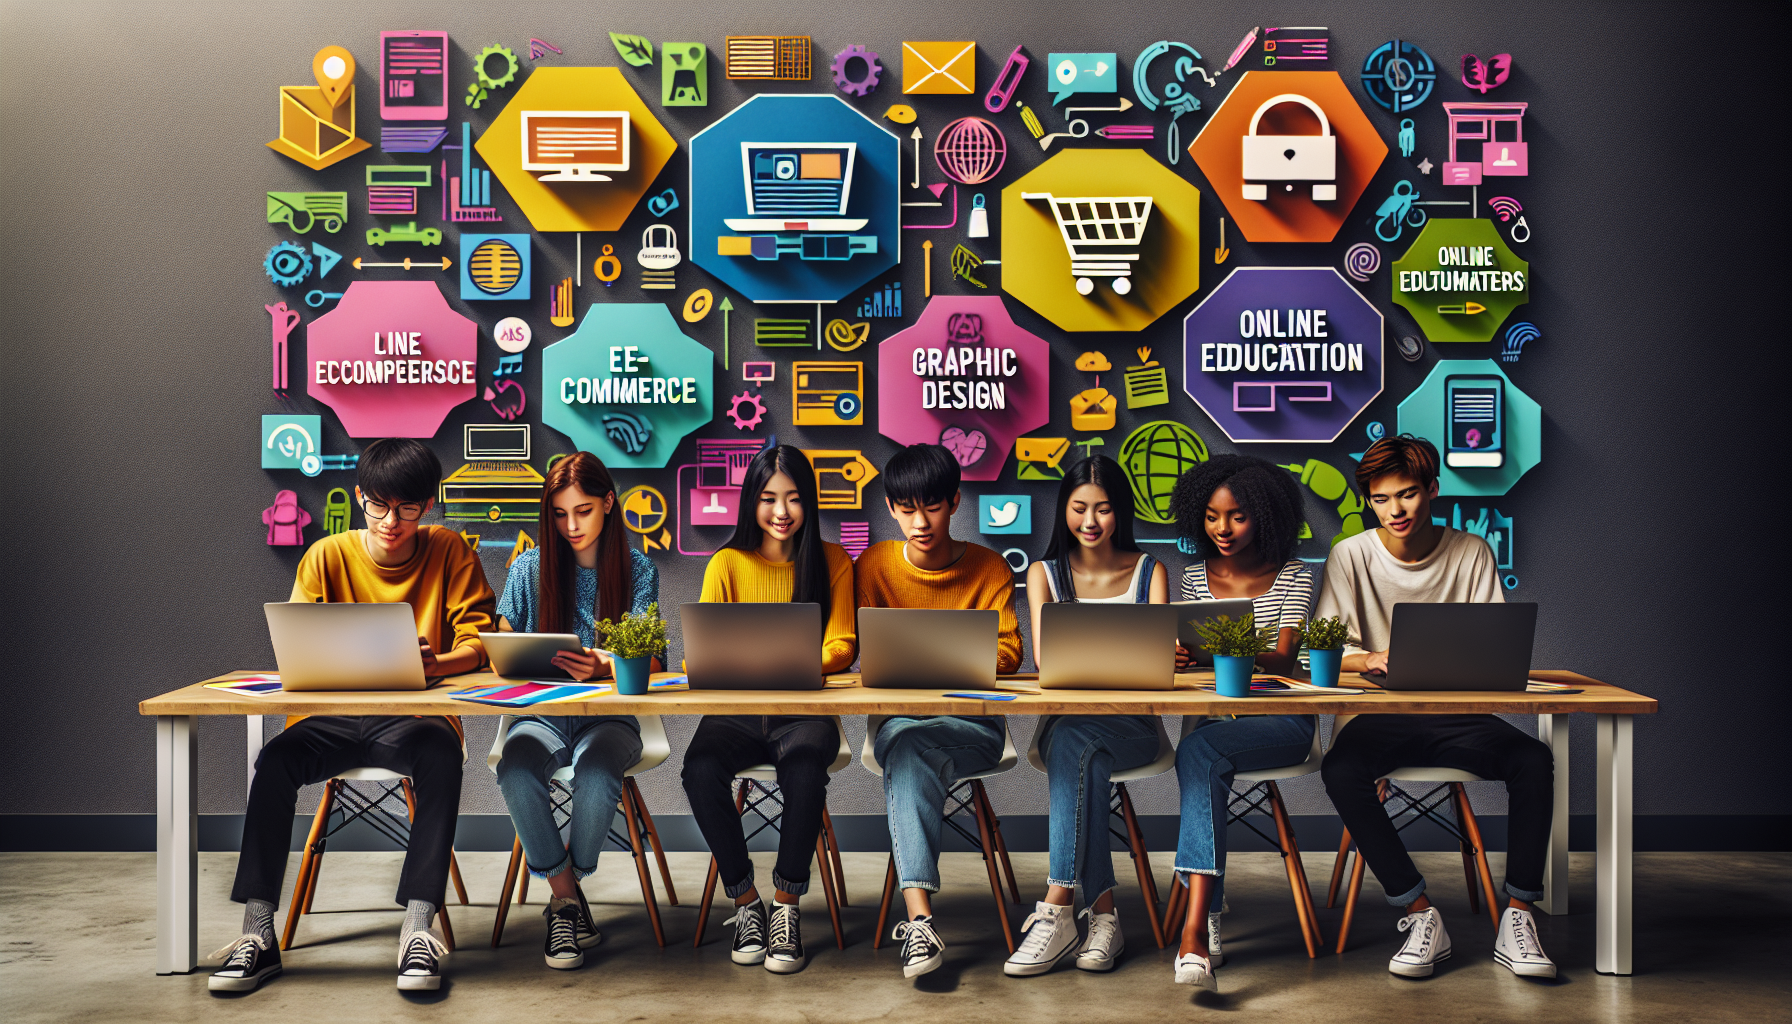 Create an image showing a vibrant and creative workspace with five teenagers collaborating on laptops and tablets. The background is filled with elements representing various online business ideas, su